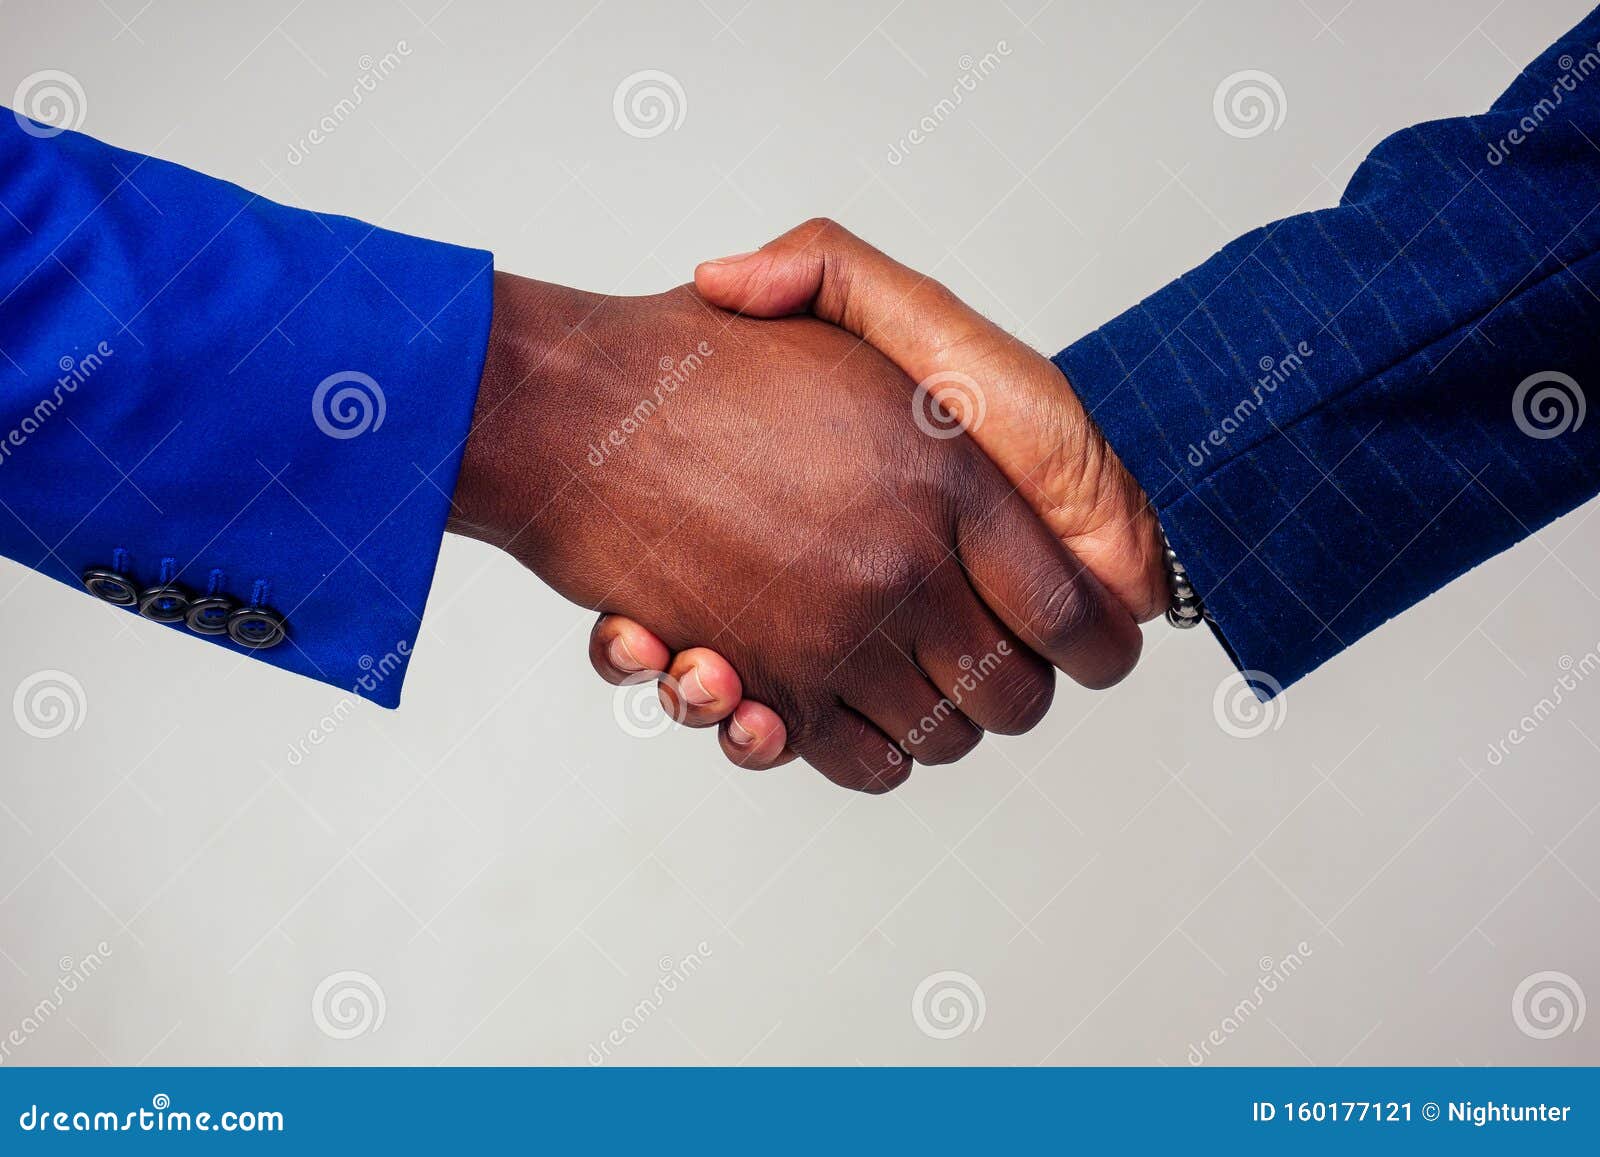 portrait of two businessmen shaking hands in a business meeting on white background in studio shot